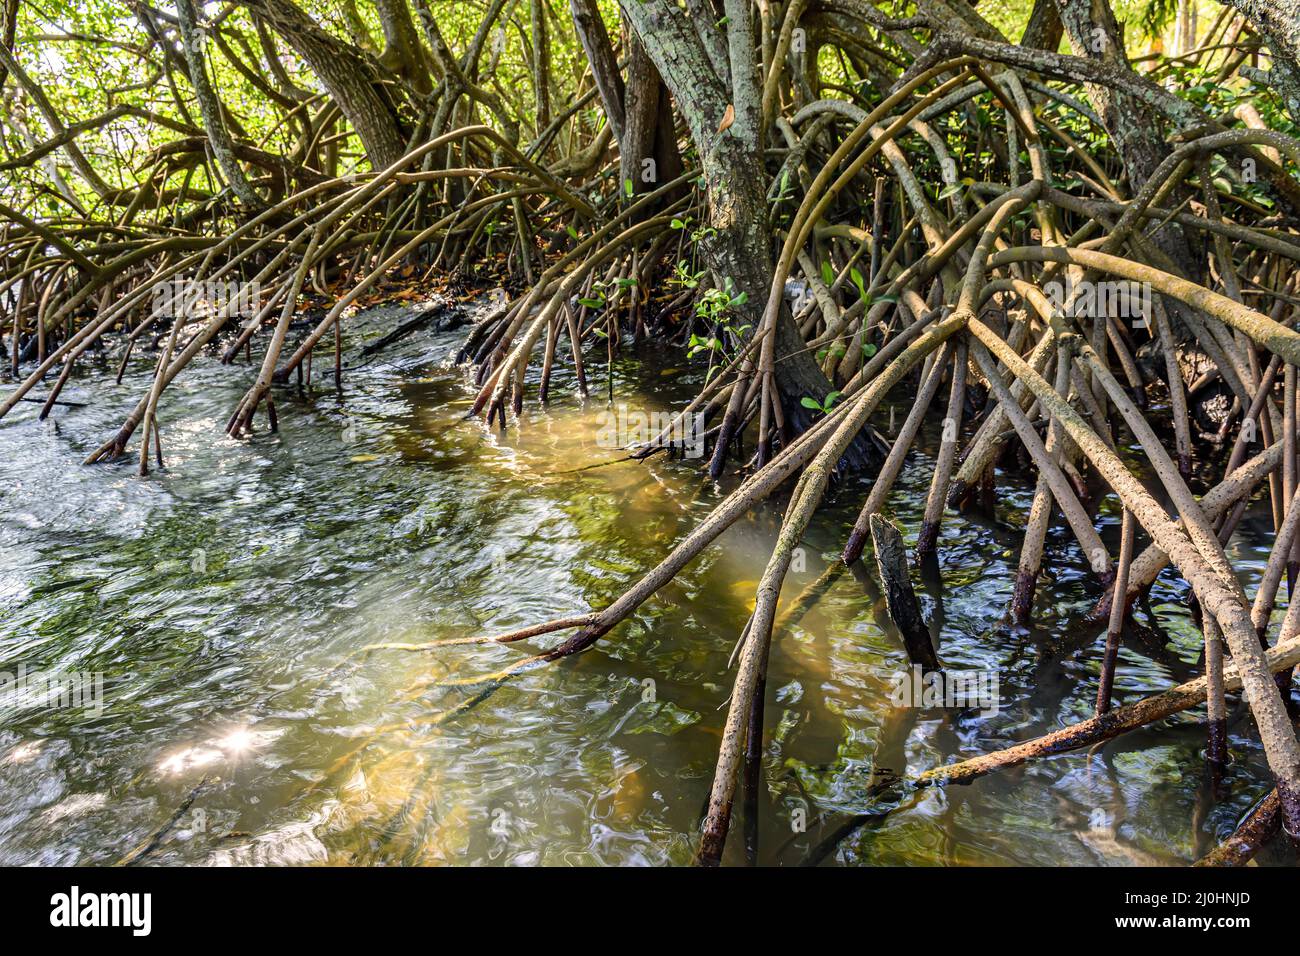 Vegetation in the tropical mangrove forest with its roots Stock Photo